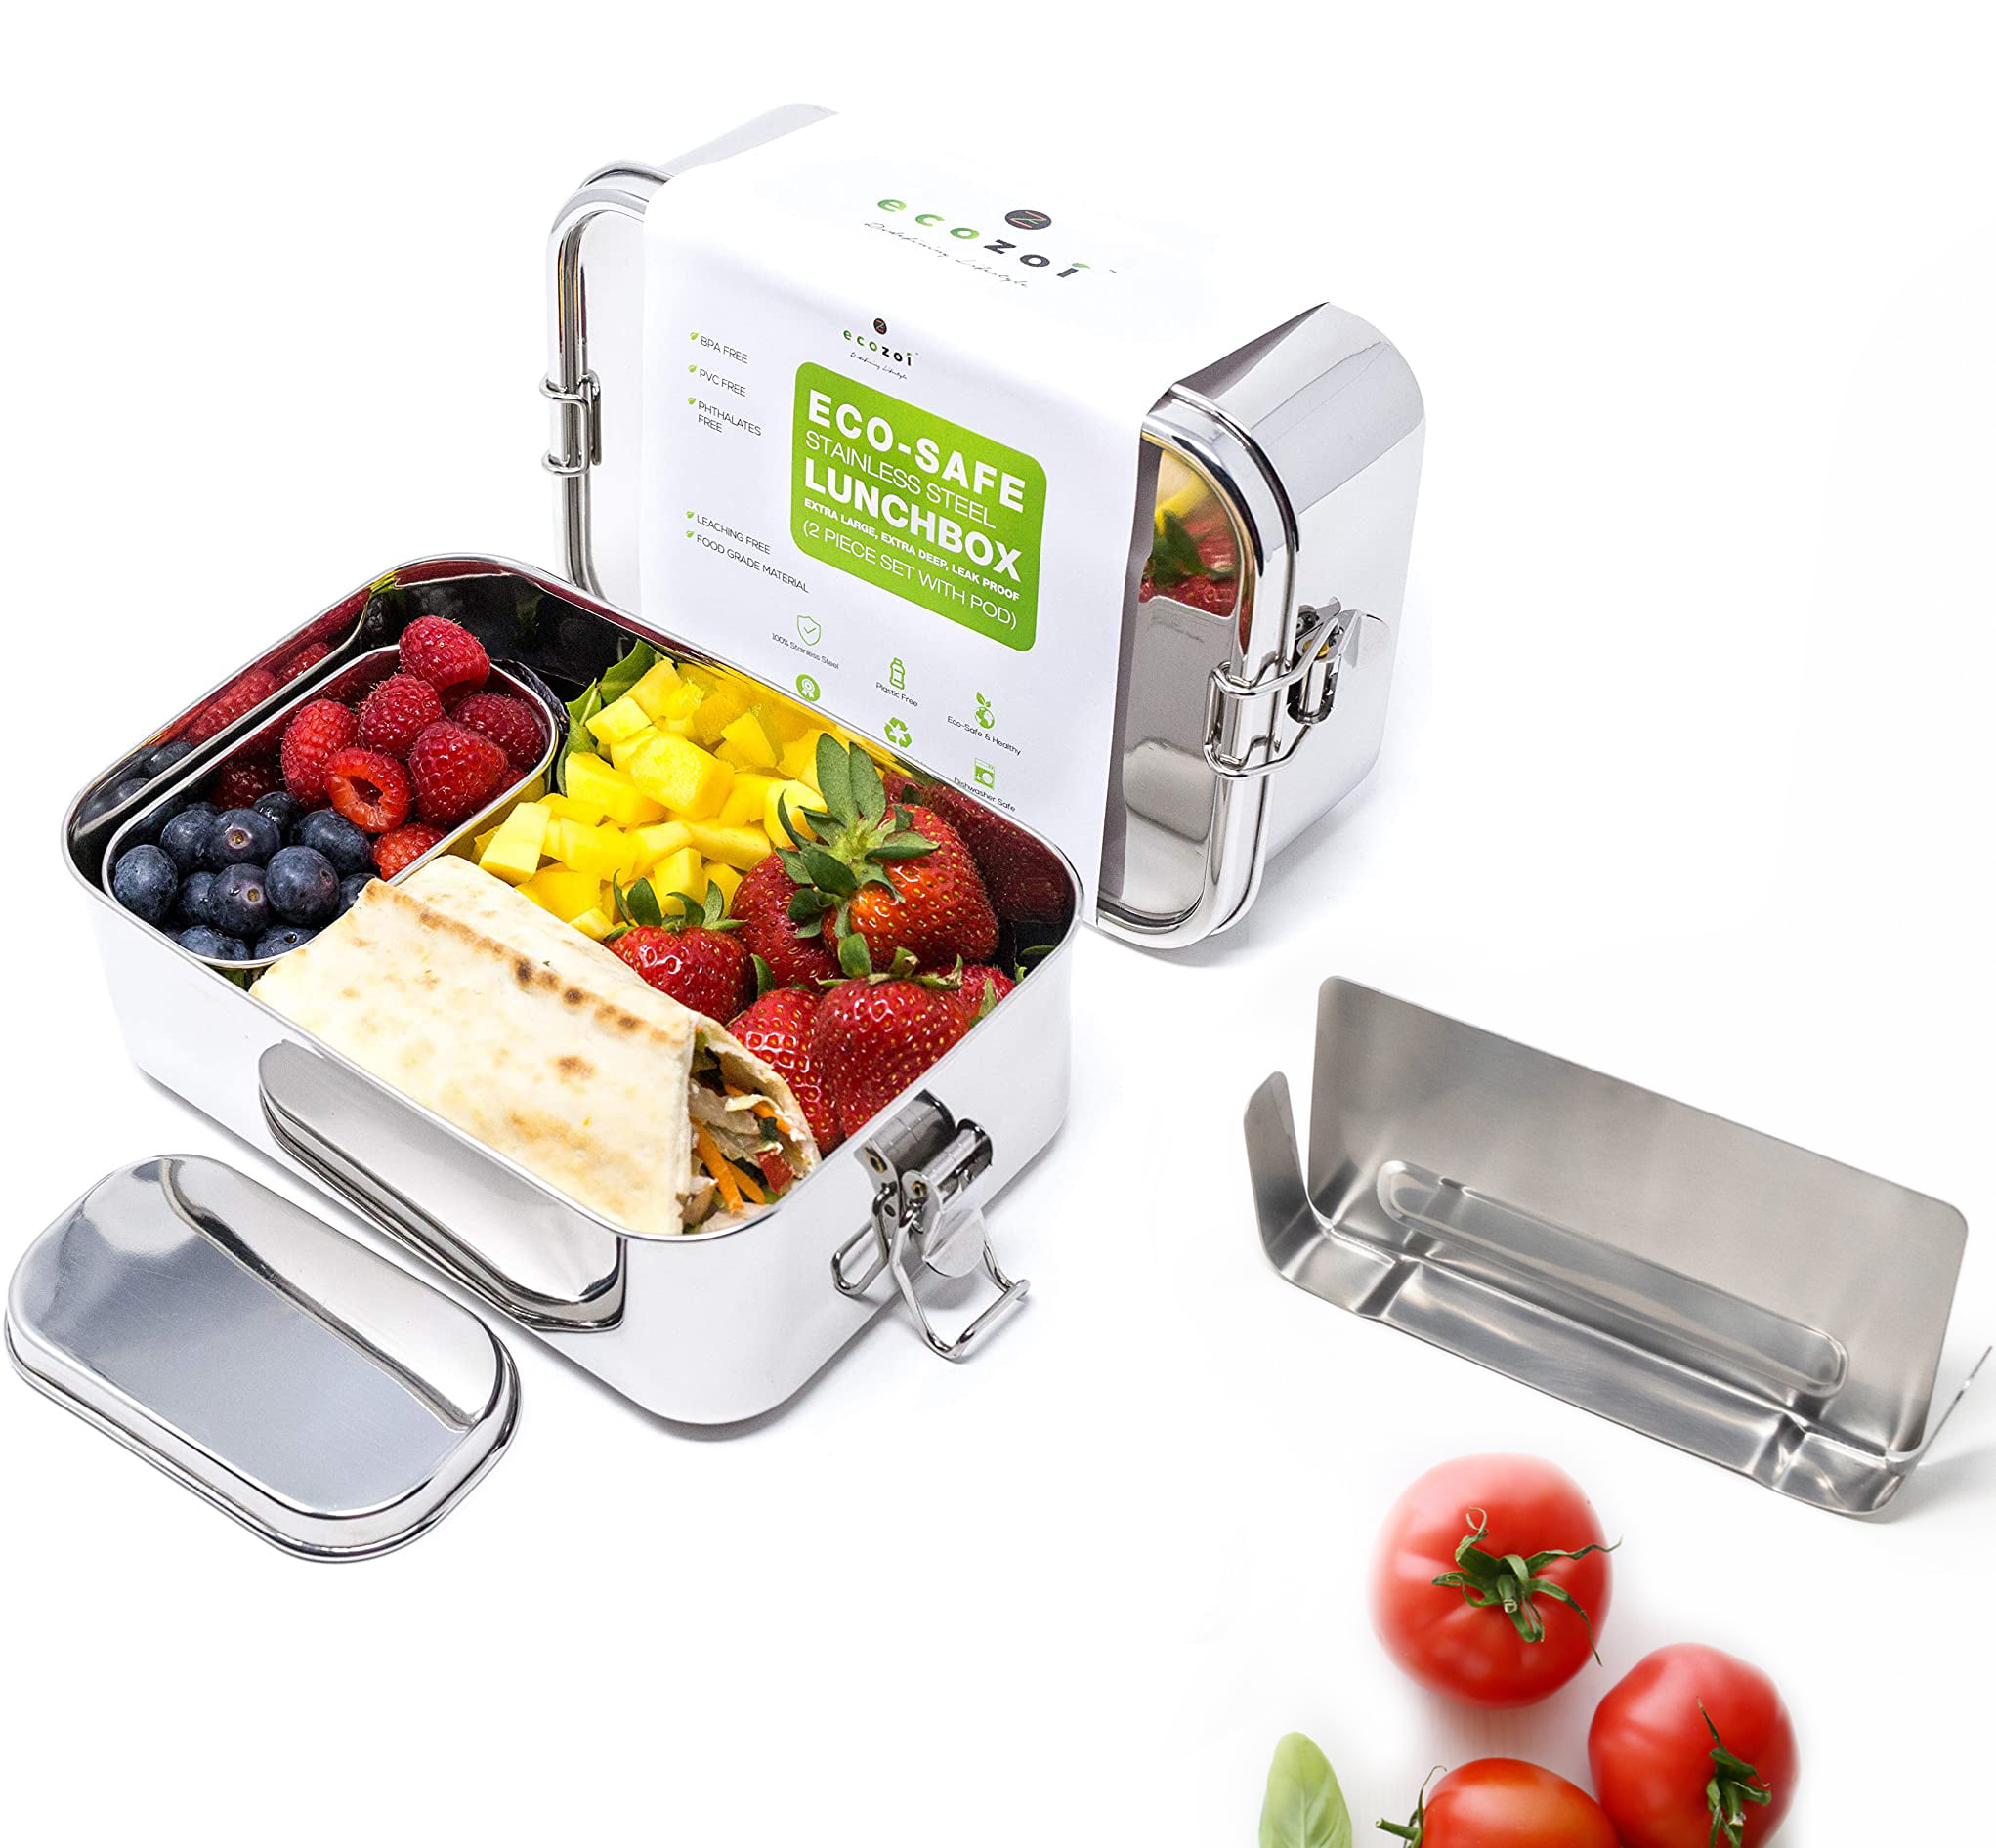 Details about   304 Stainless Steel Lunch Boxes Two-layers Bento Box for Kids & Adults